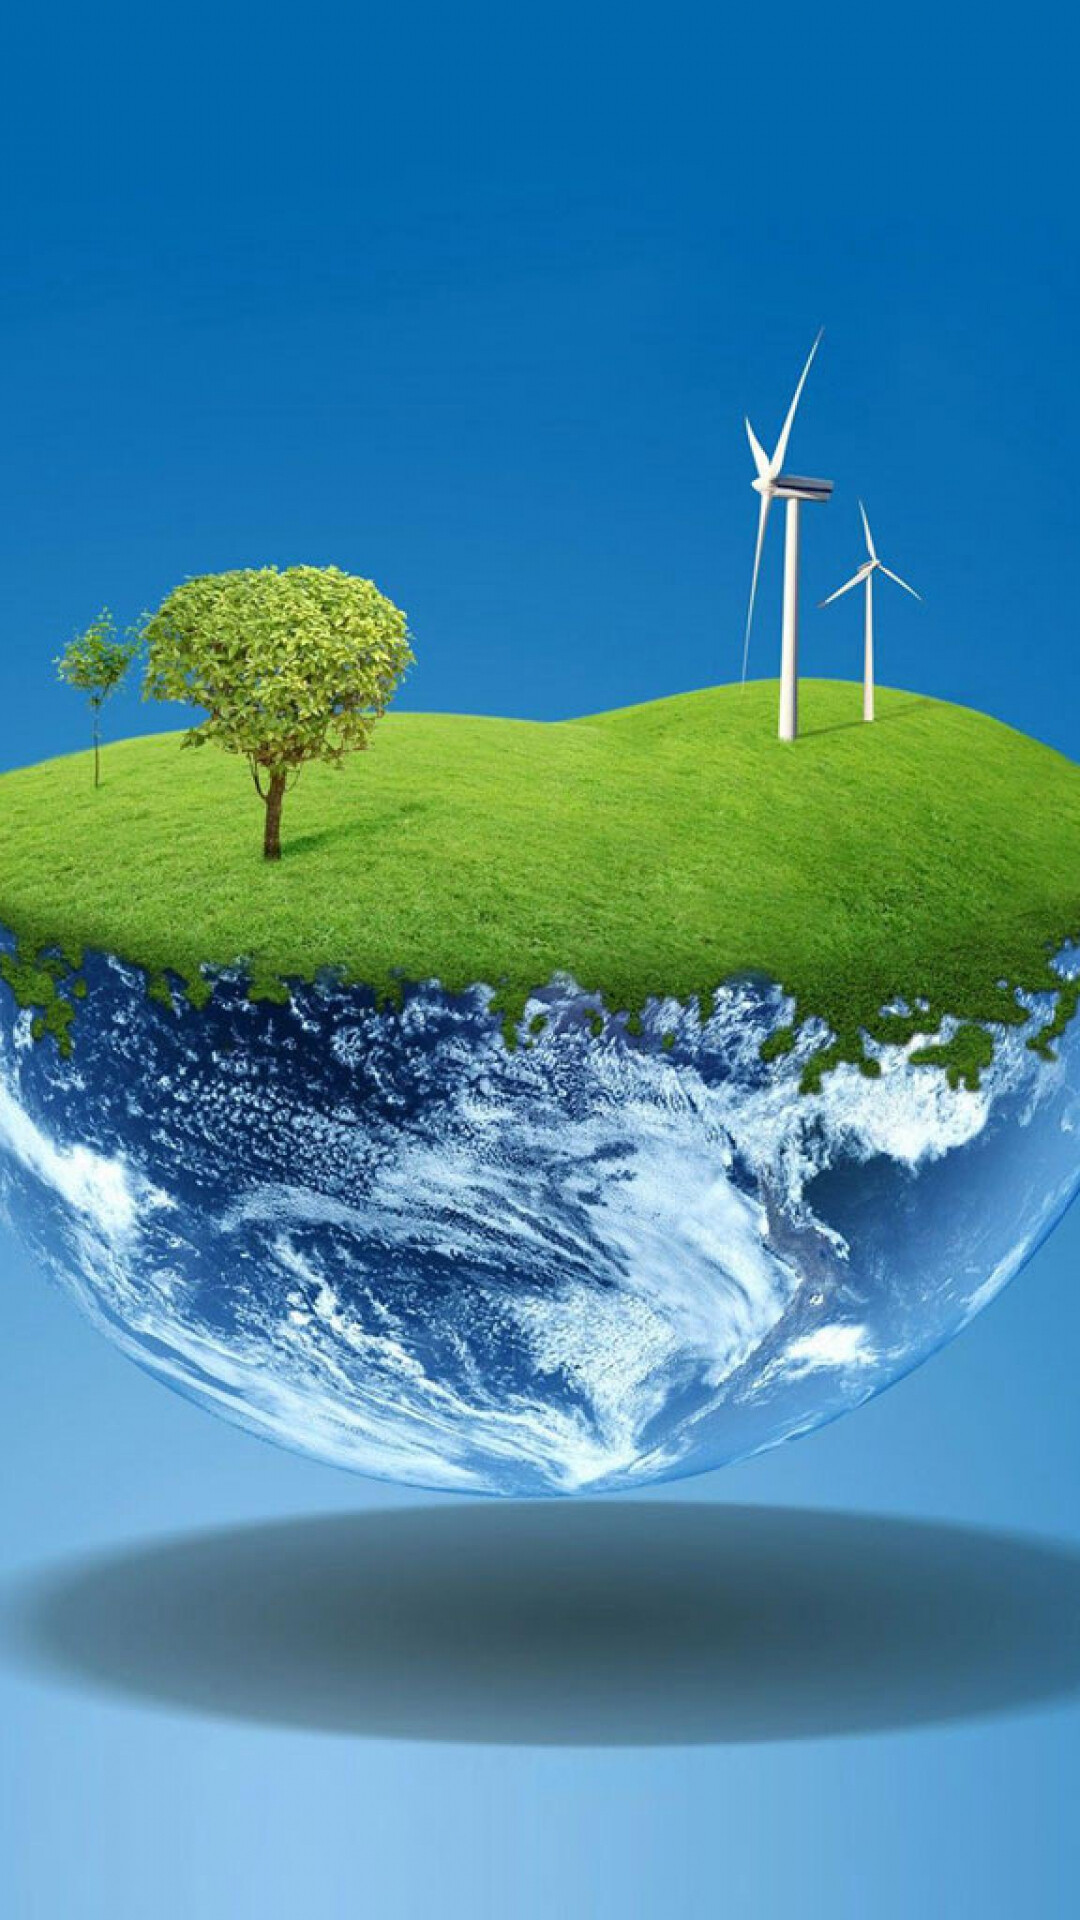 Go Green: Making the earth a healthy and safe place to live in, Environmentally friendly. 1080x1920 Full HD Wallpaper.